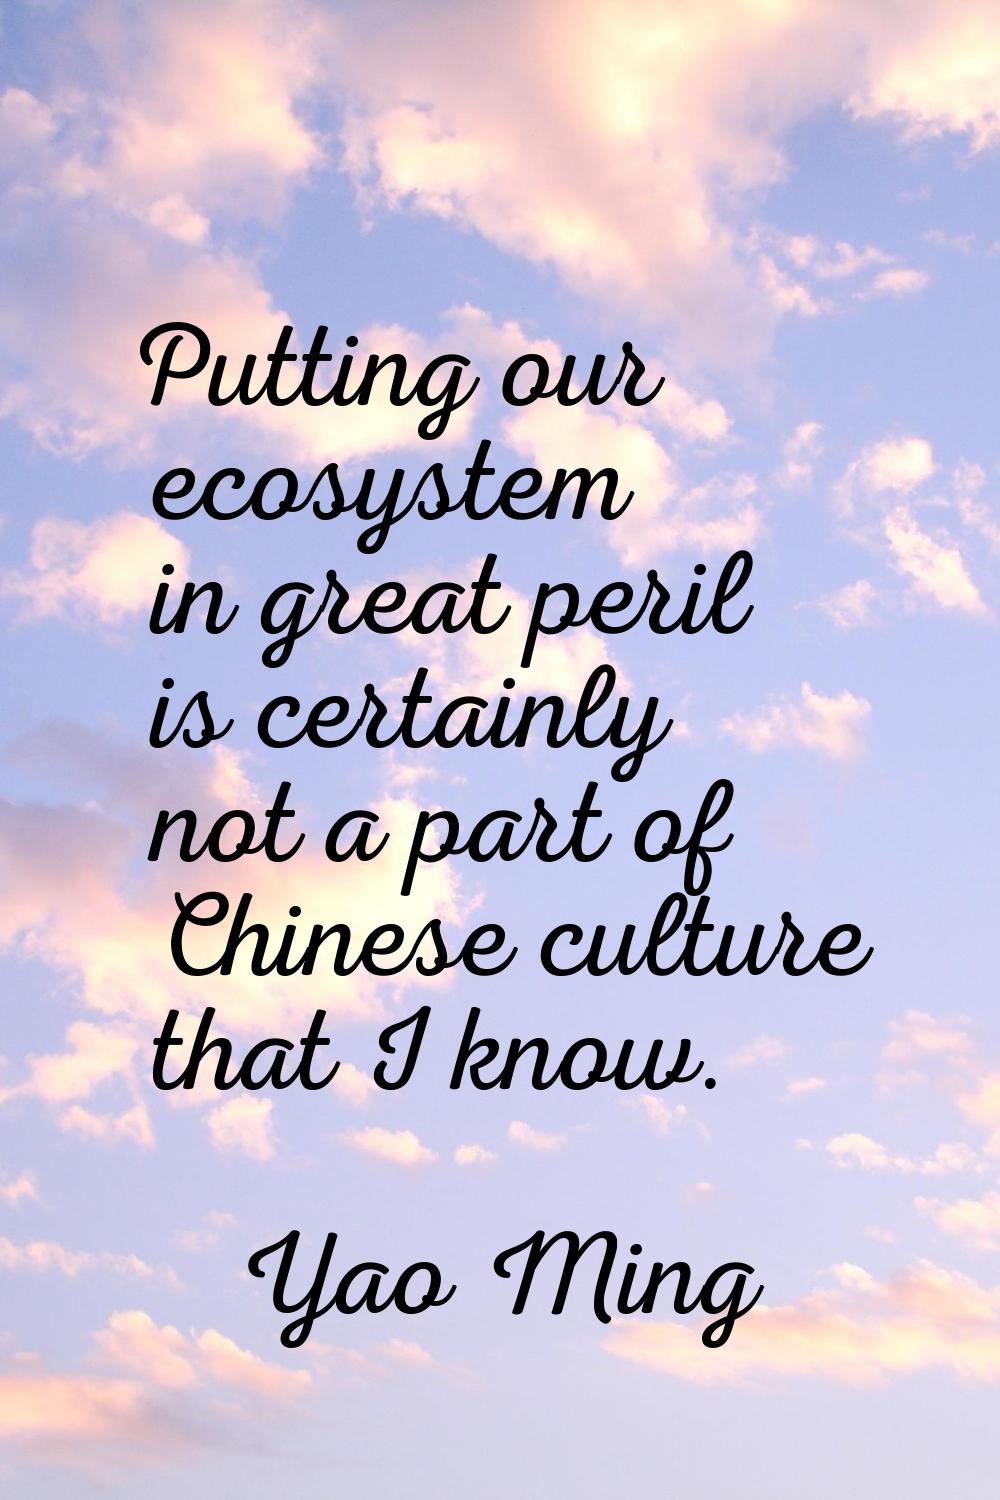 Putting our ecosystem in great peril is certainly not a part of Chinese culture that I know.